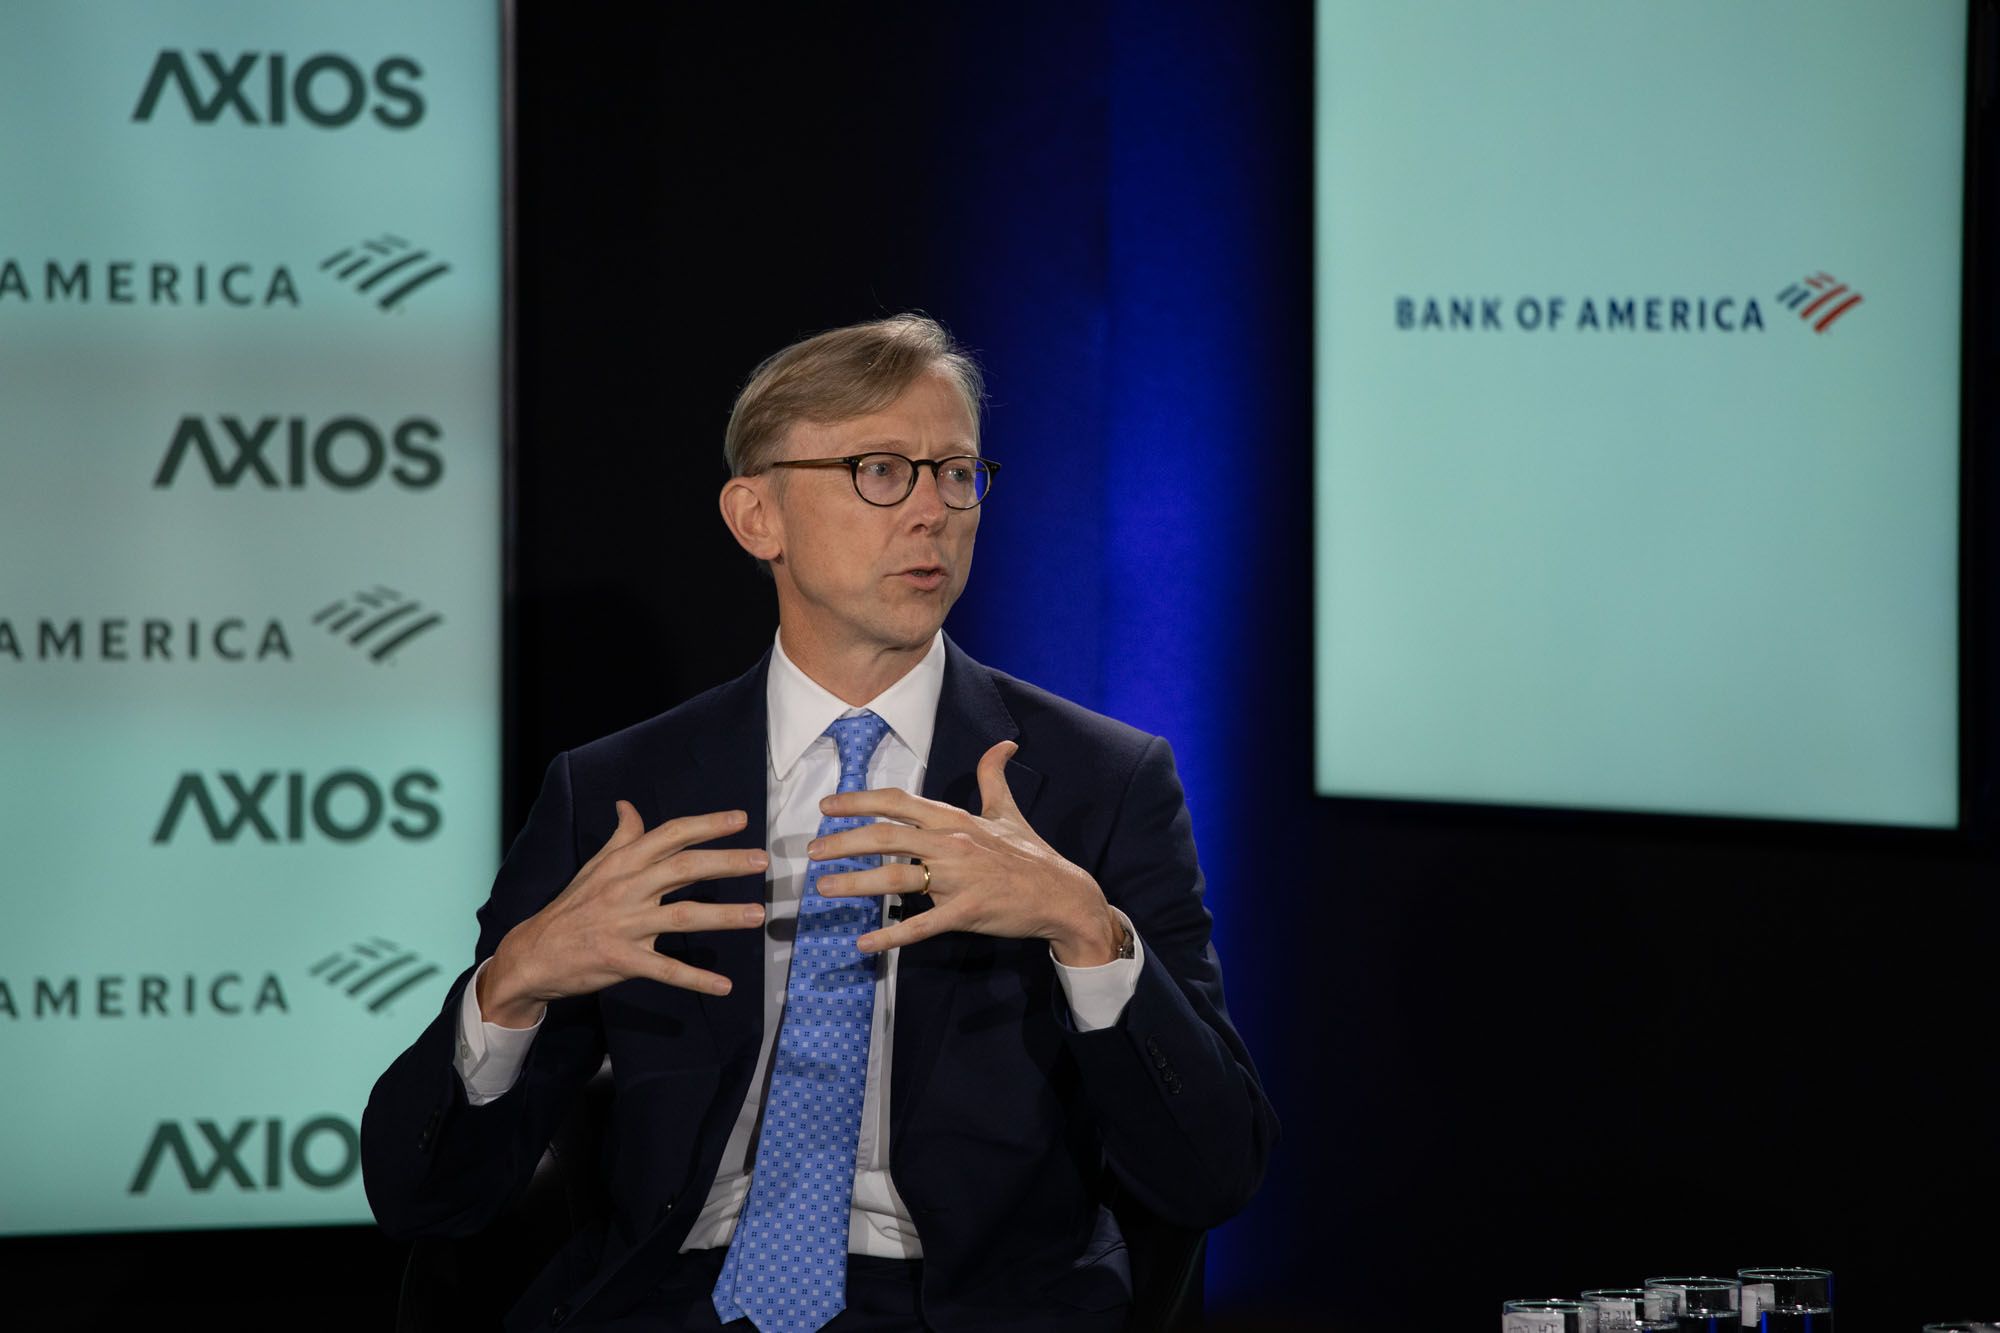 Brian Hook in conversation on the Axios stage with Mike Allen. 